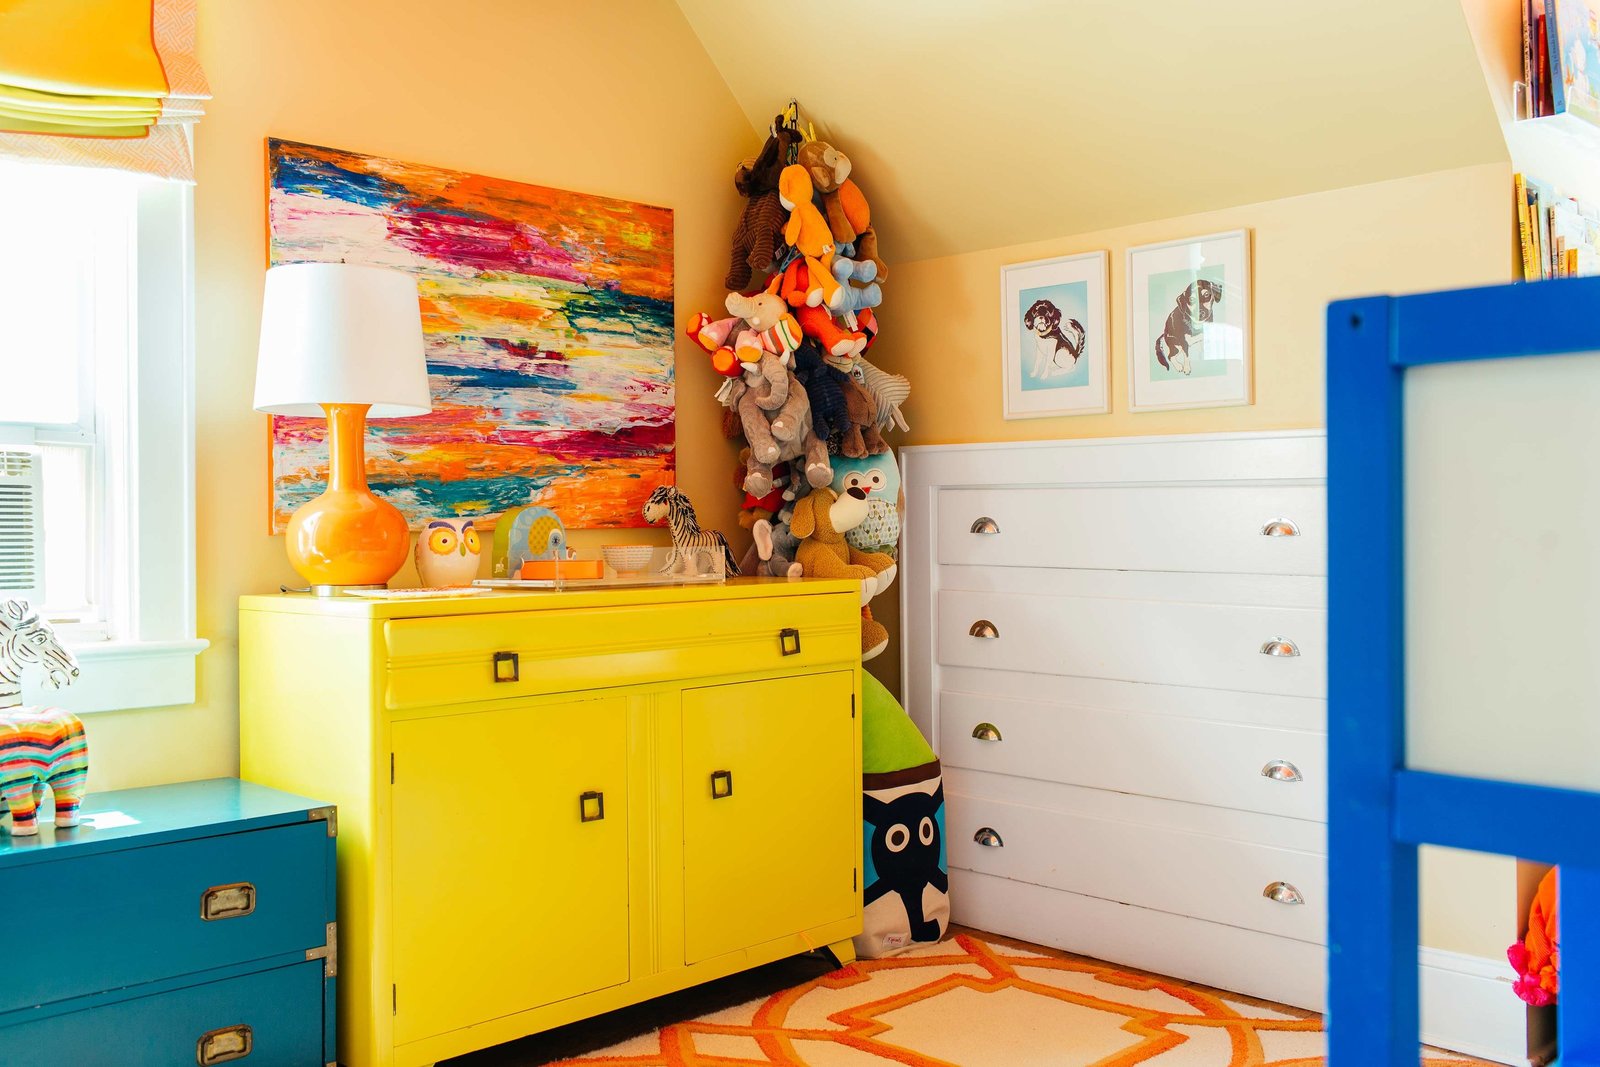 A boys bedroom with a yellow dresser and built in white dresser.